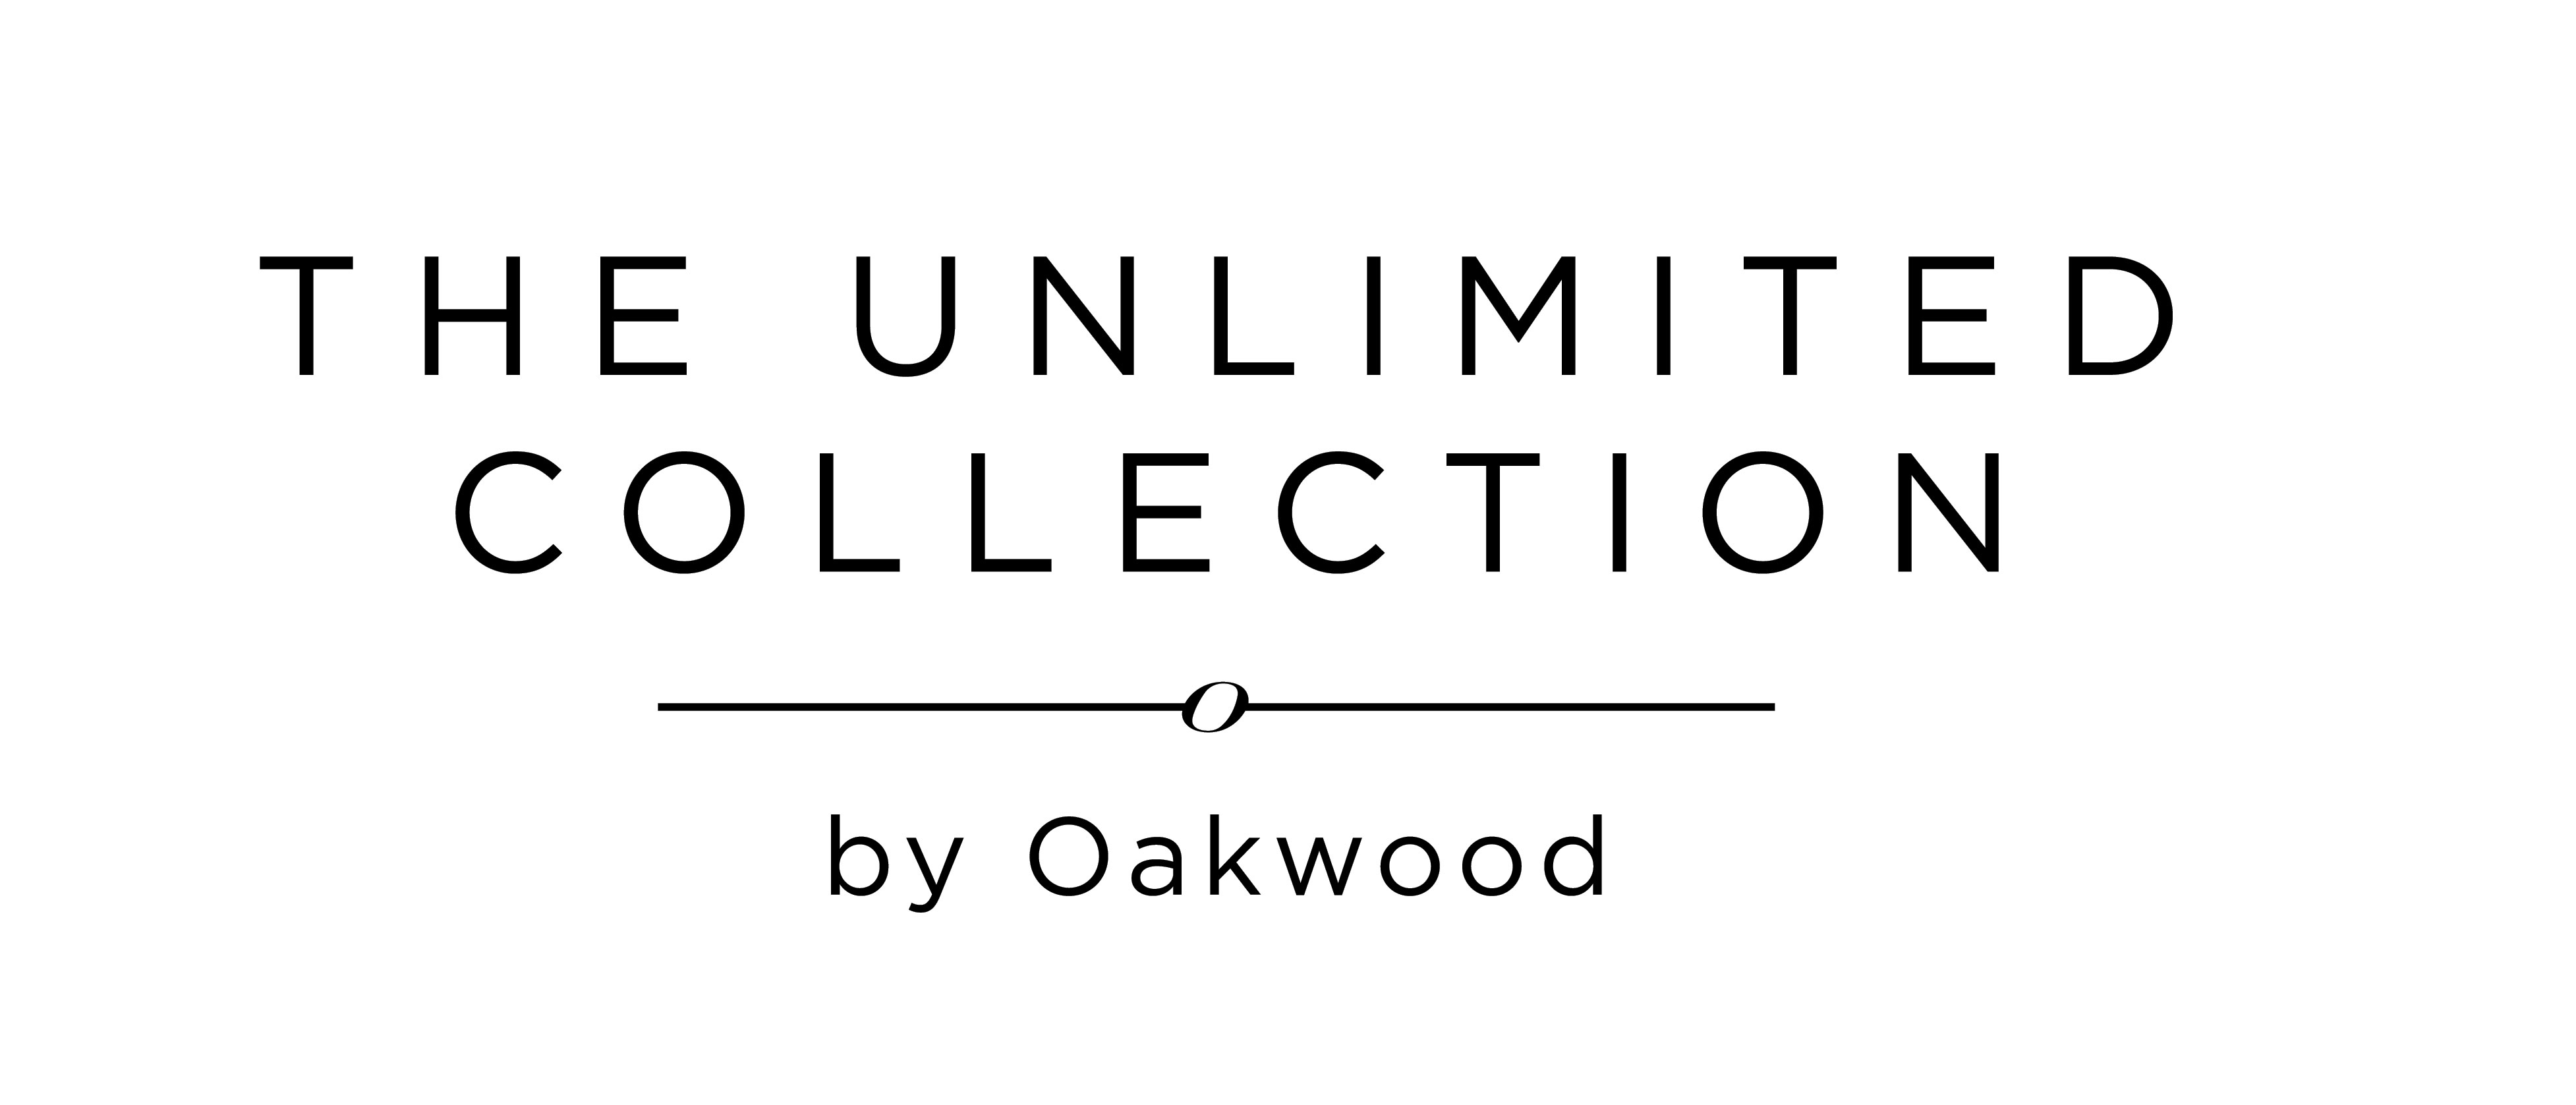 Unlimited Collection by Oakwood